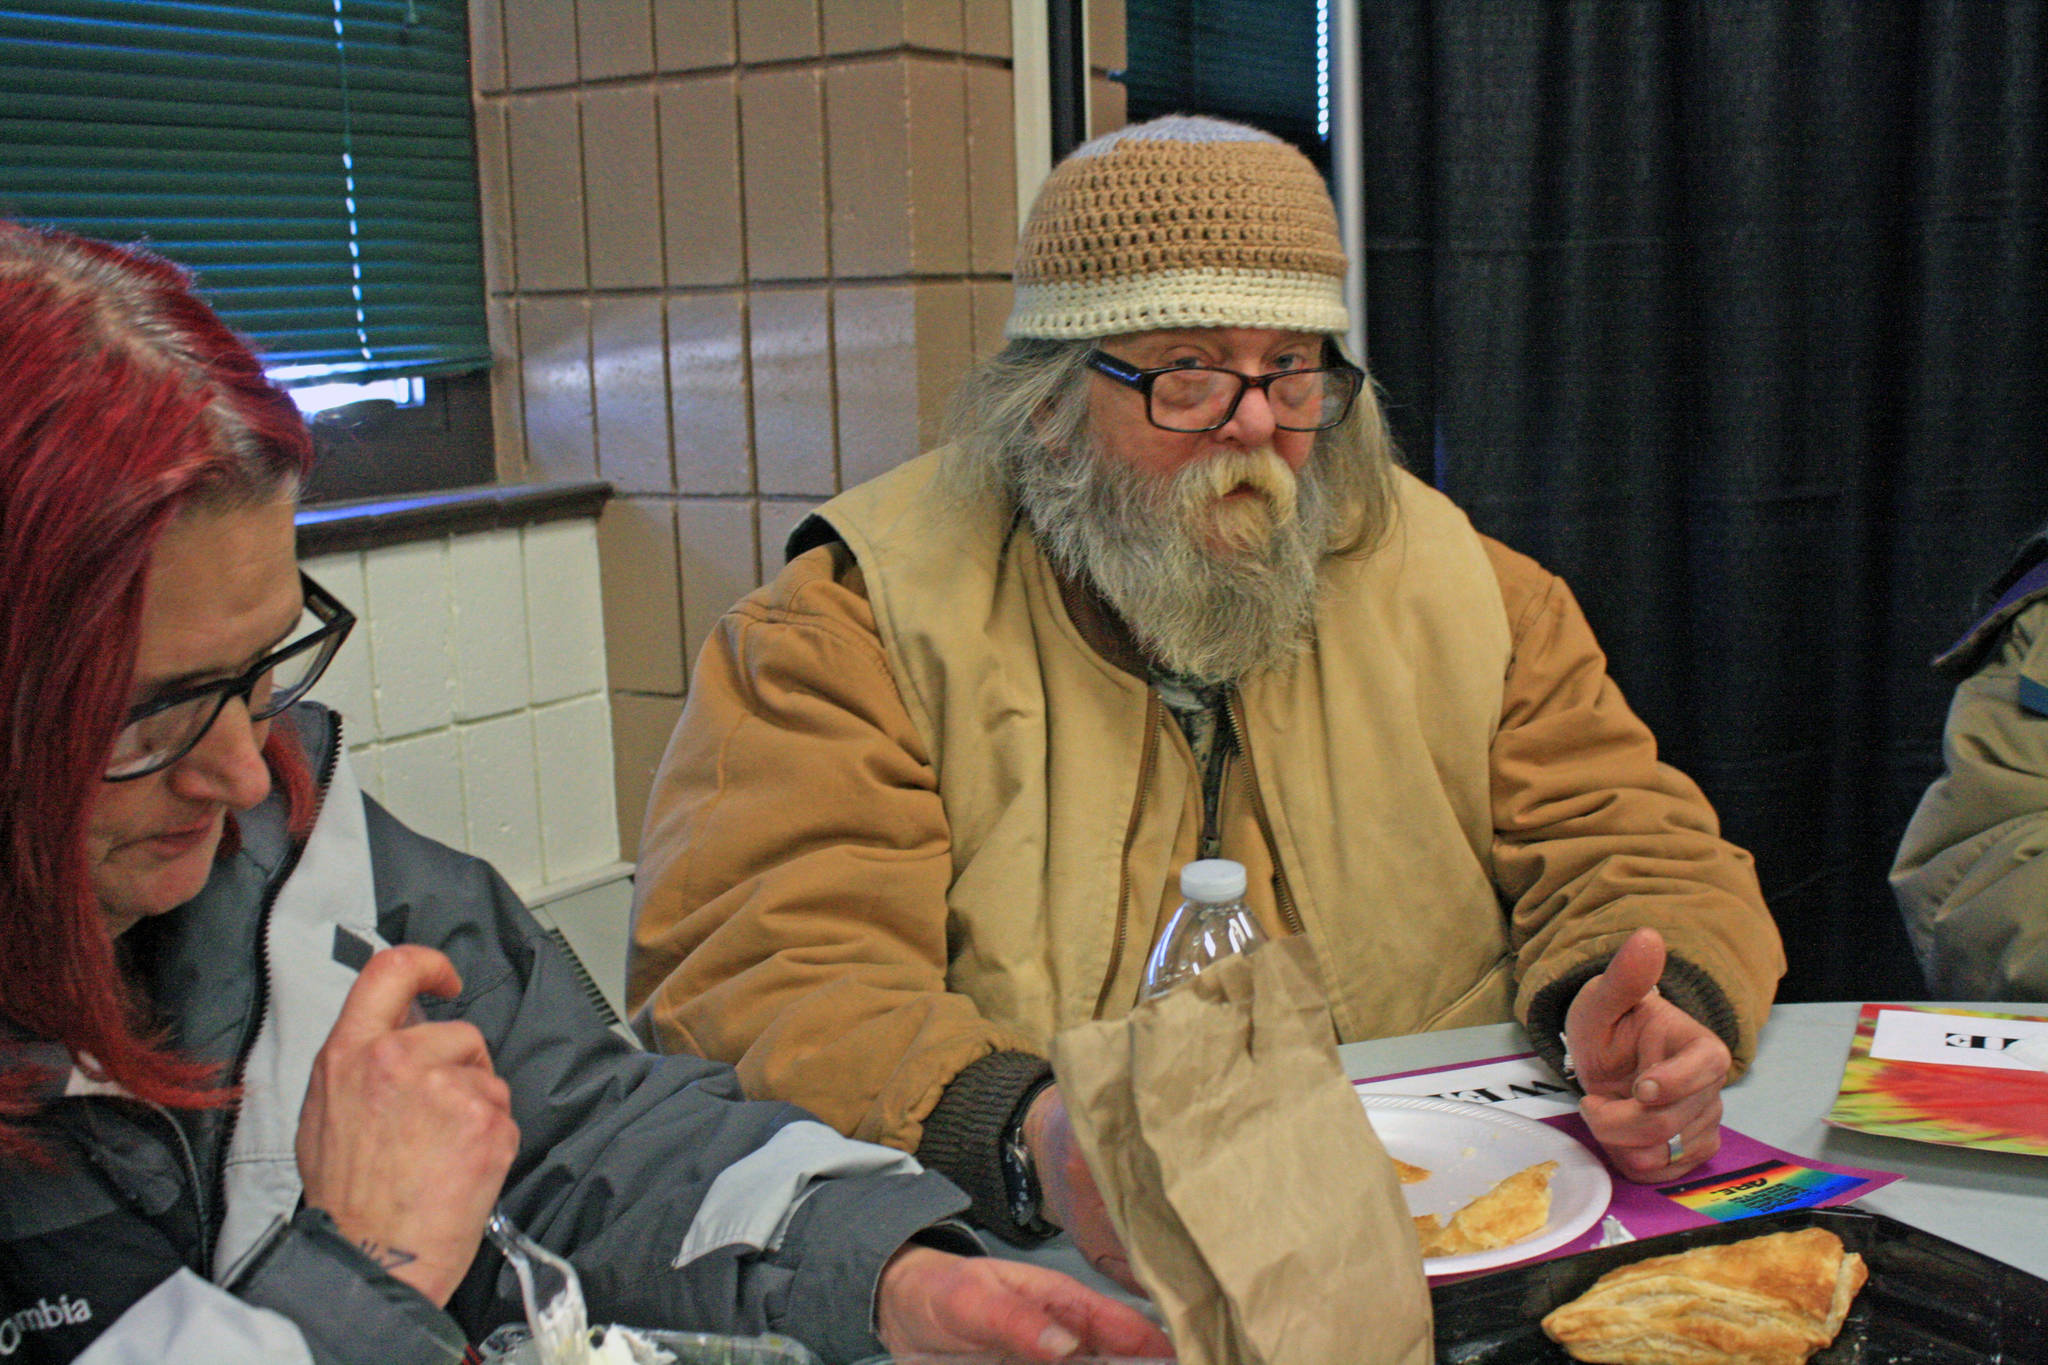 Donald Akers sits down to lunch during Project Homeless Connect at the Soldotna Regional Sports Complex on Jan. 24. Akers, who was referred to the event by counselors at the Peninsula Community Health Services, came to the event to get extra winter clothes and some propane. (Photo by Erin Thompson/Peninsula Clarion)